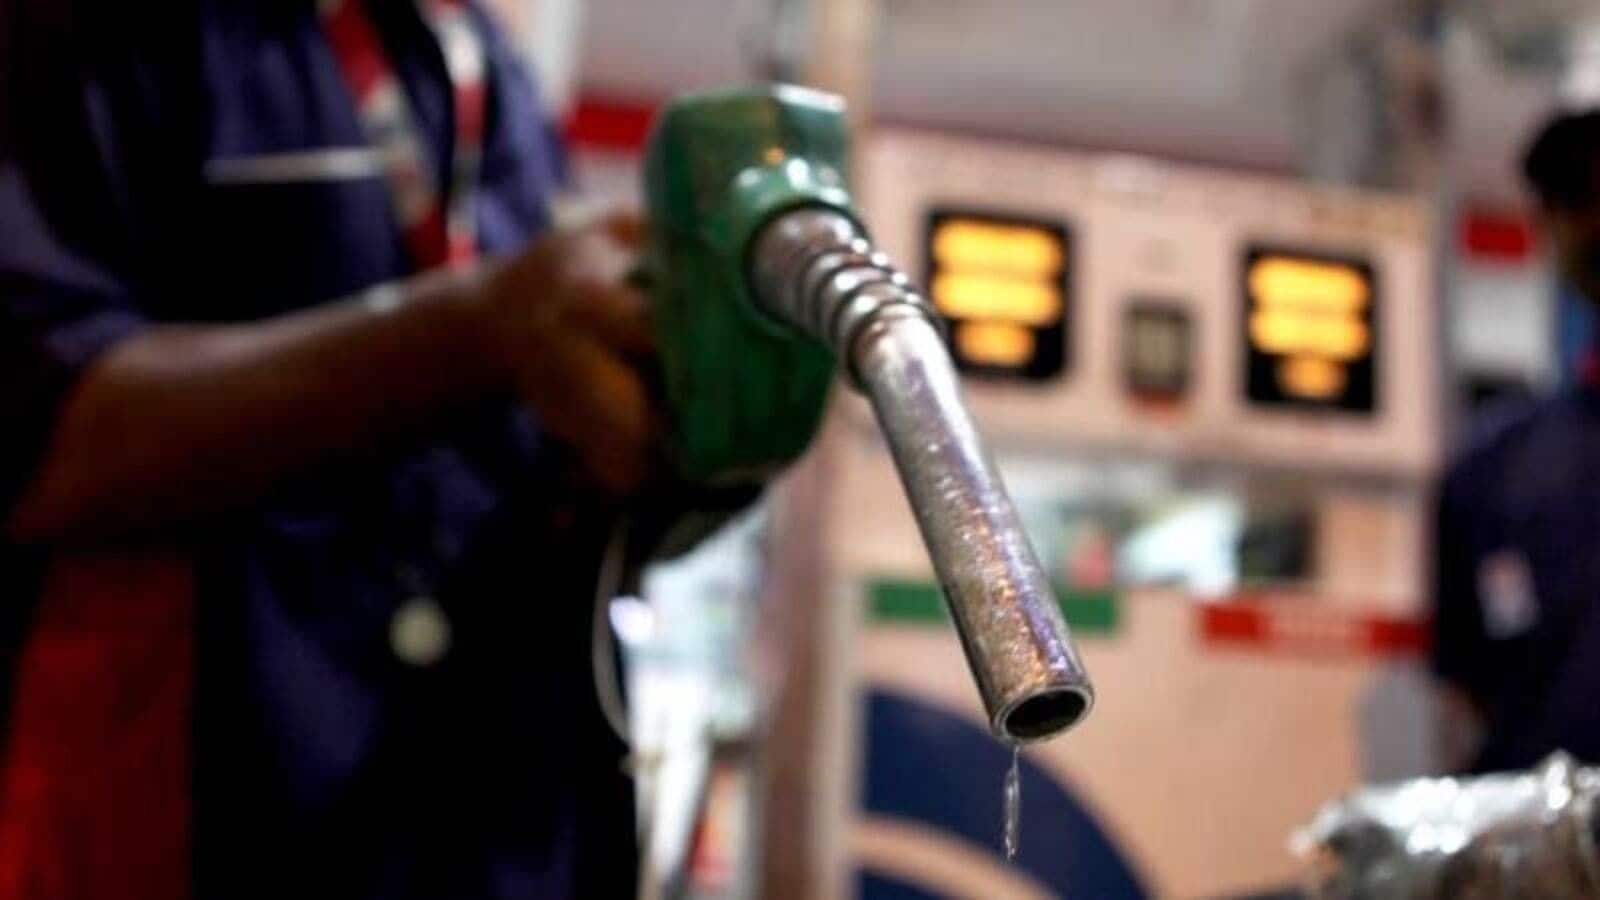 Petrol sales unchanged, diesel demand dips amid Indian election campaigns